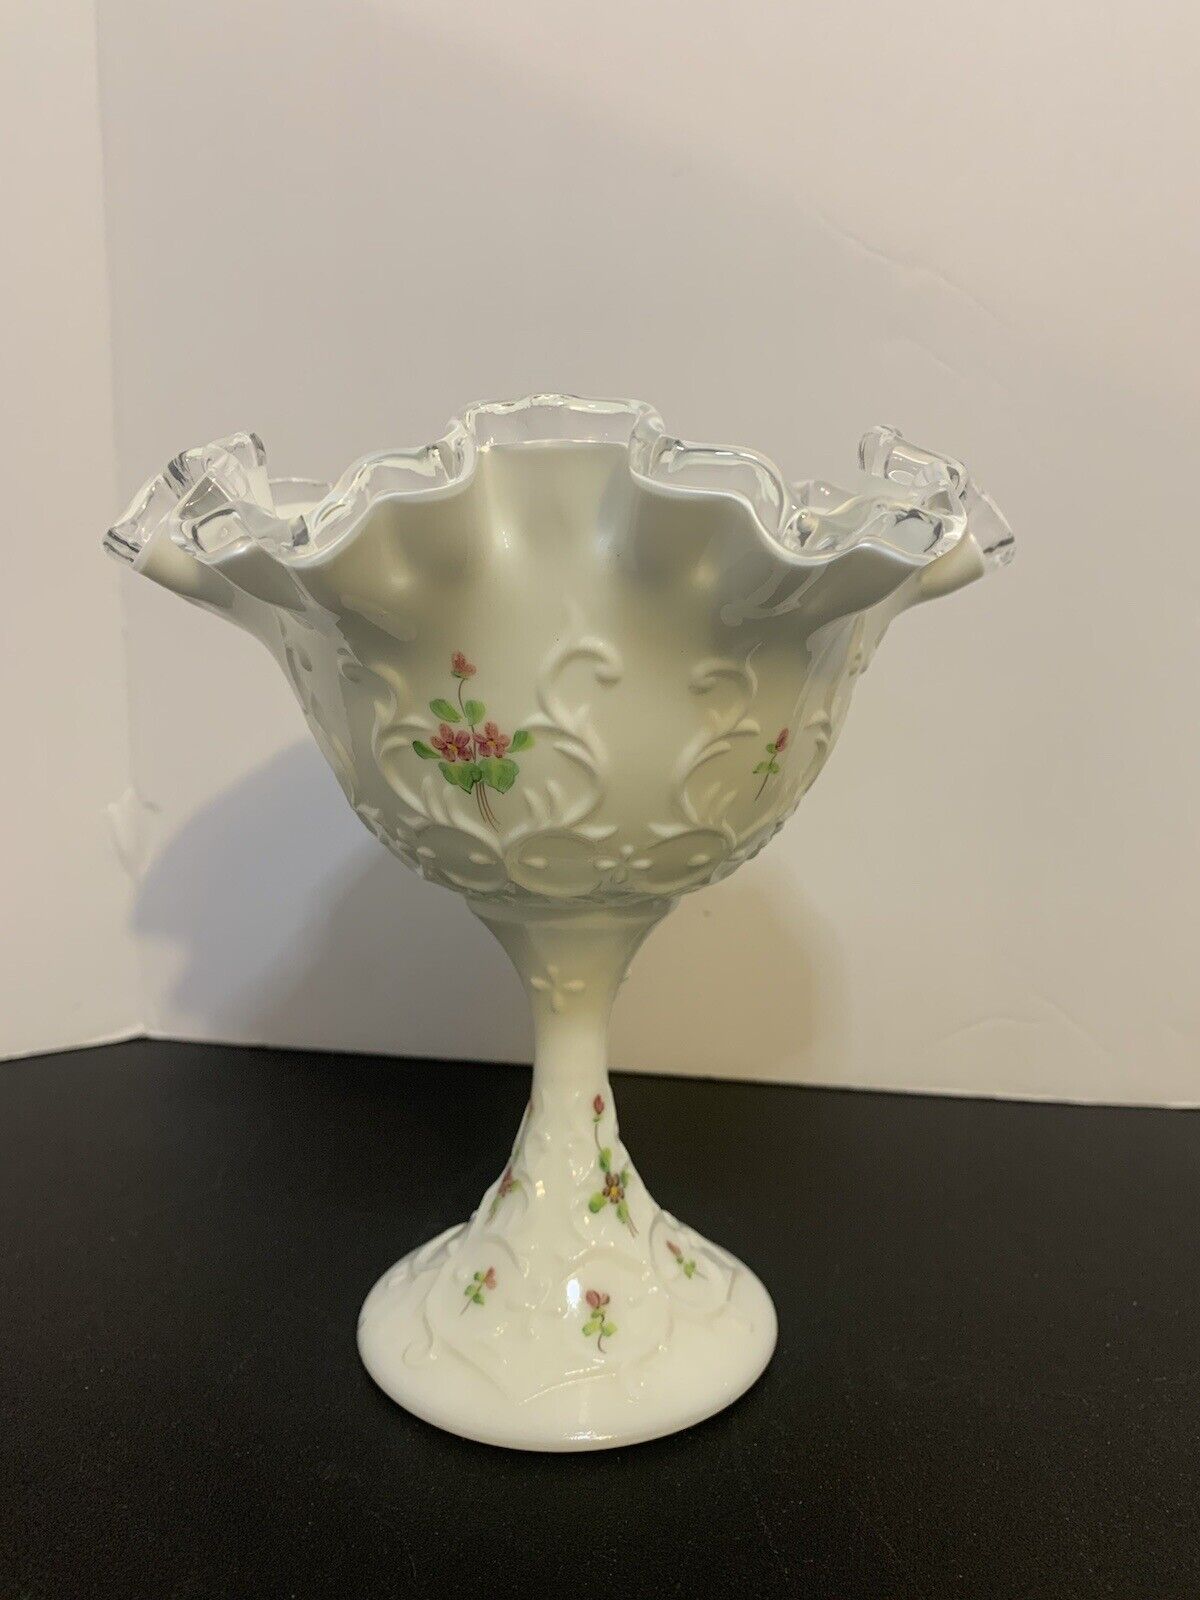 Vintage Fenton Compote Candy Dish Hand Painted Silver Crest Milk Glass